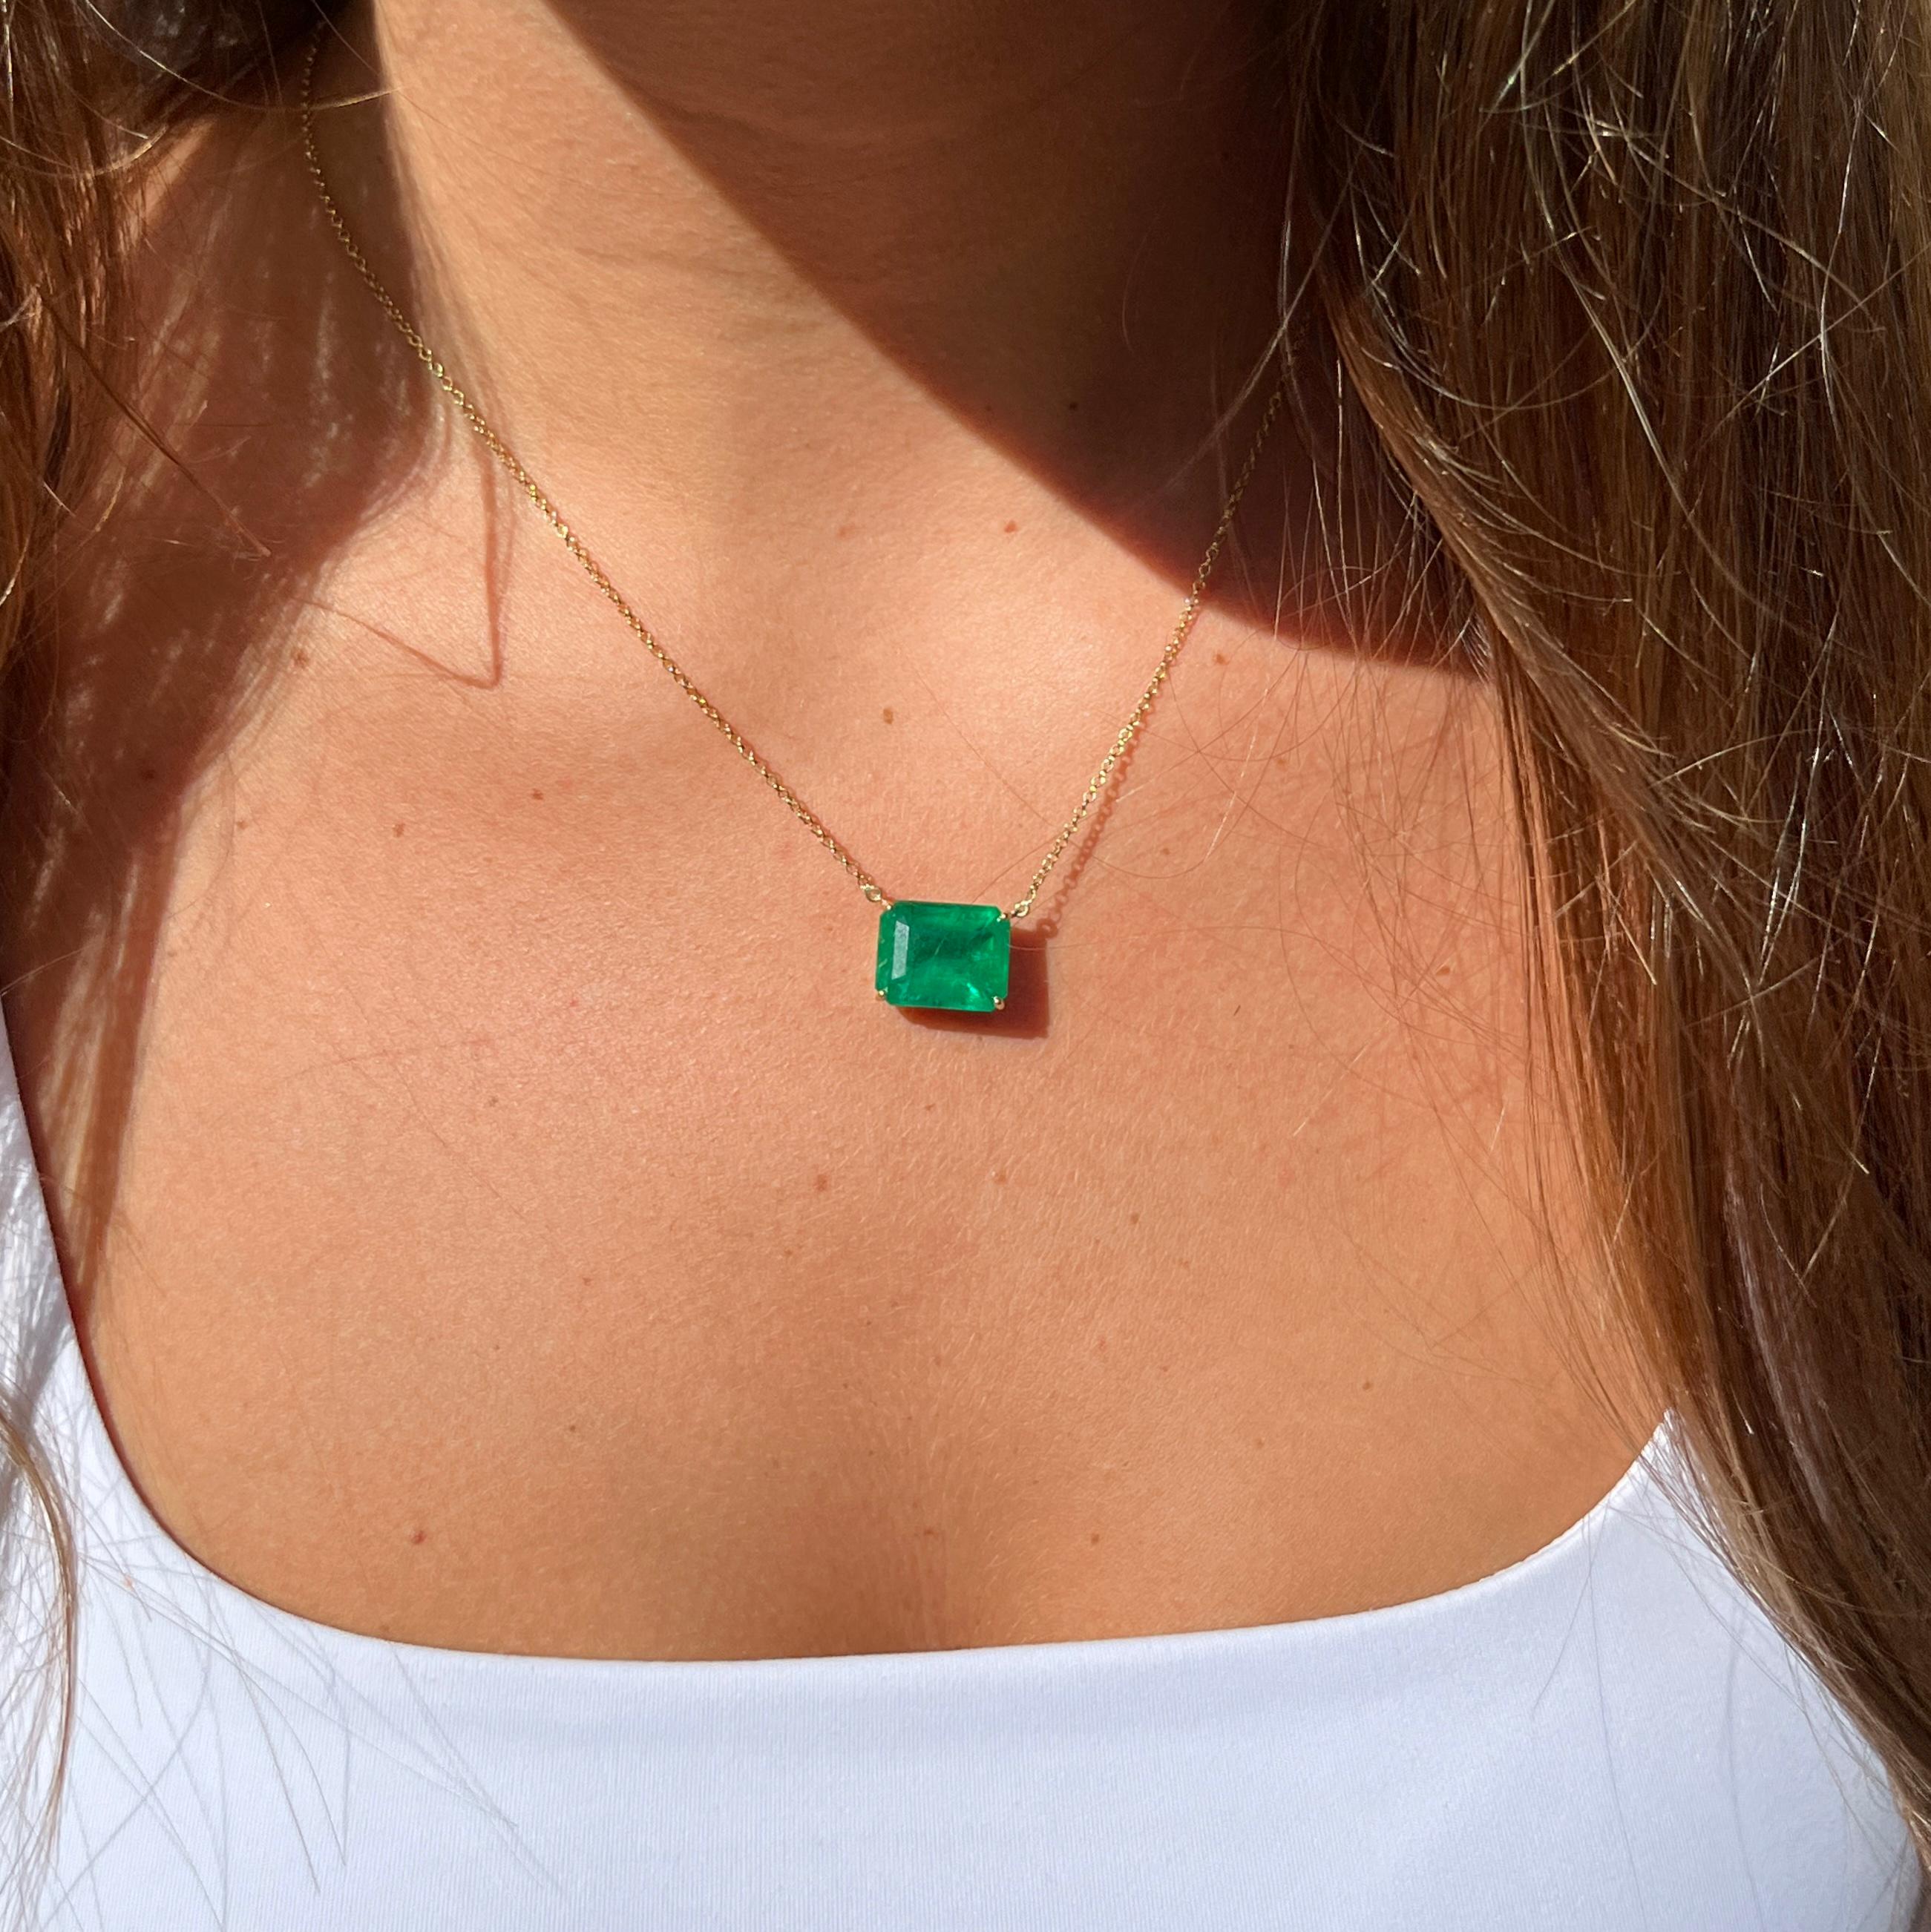 8.67 Carat Vivid Green Colombian Emerald Solitaire Pendant Necklace in 18K Gold For Sale 1